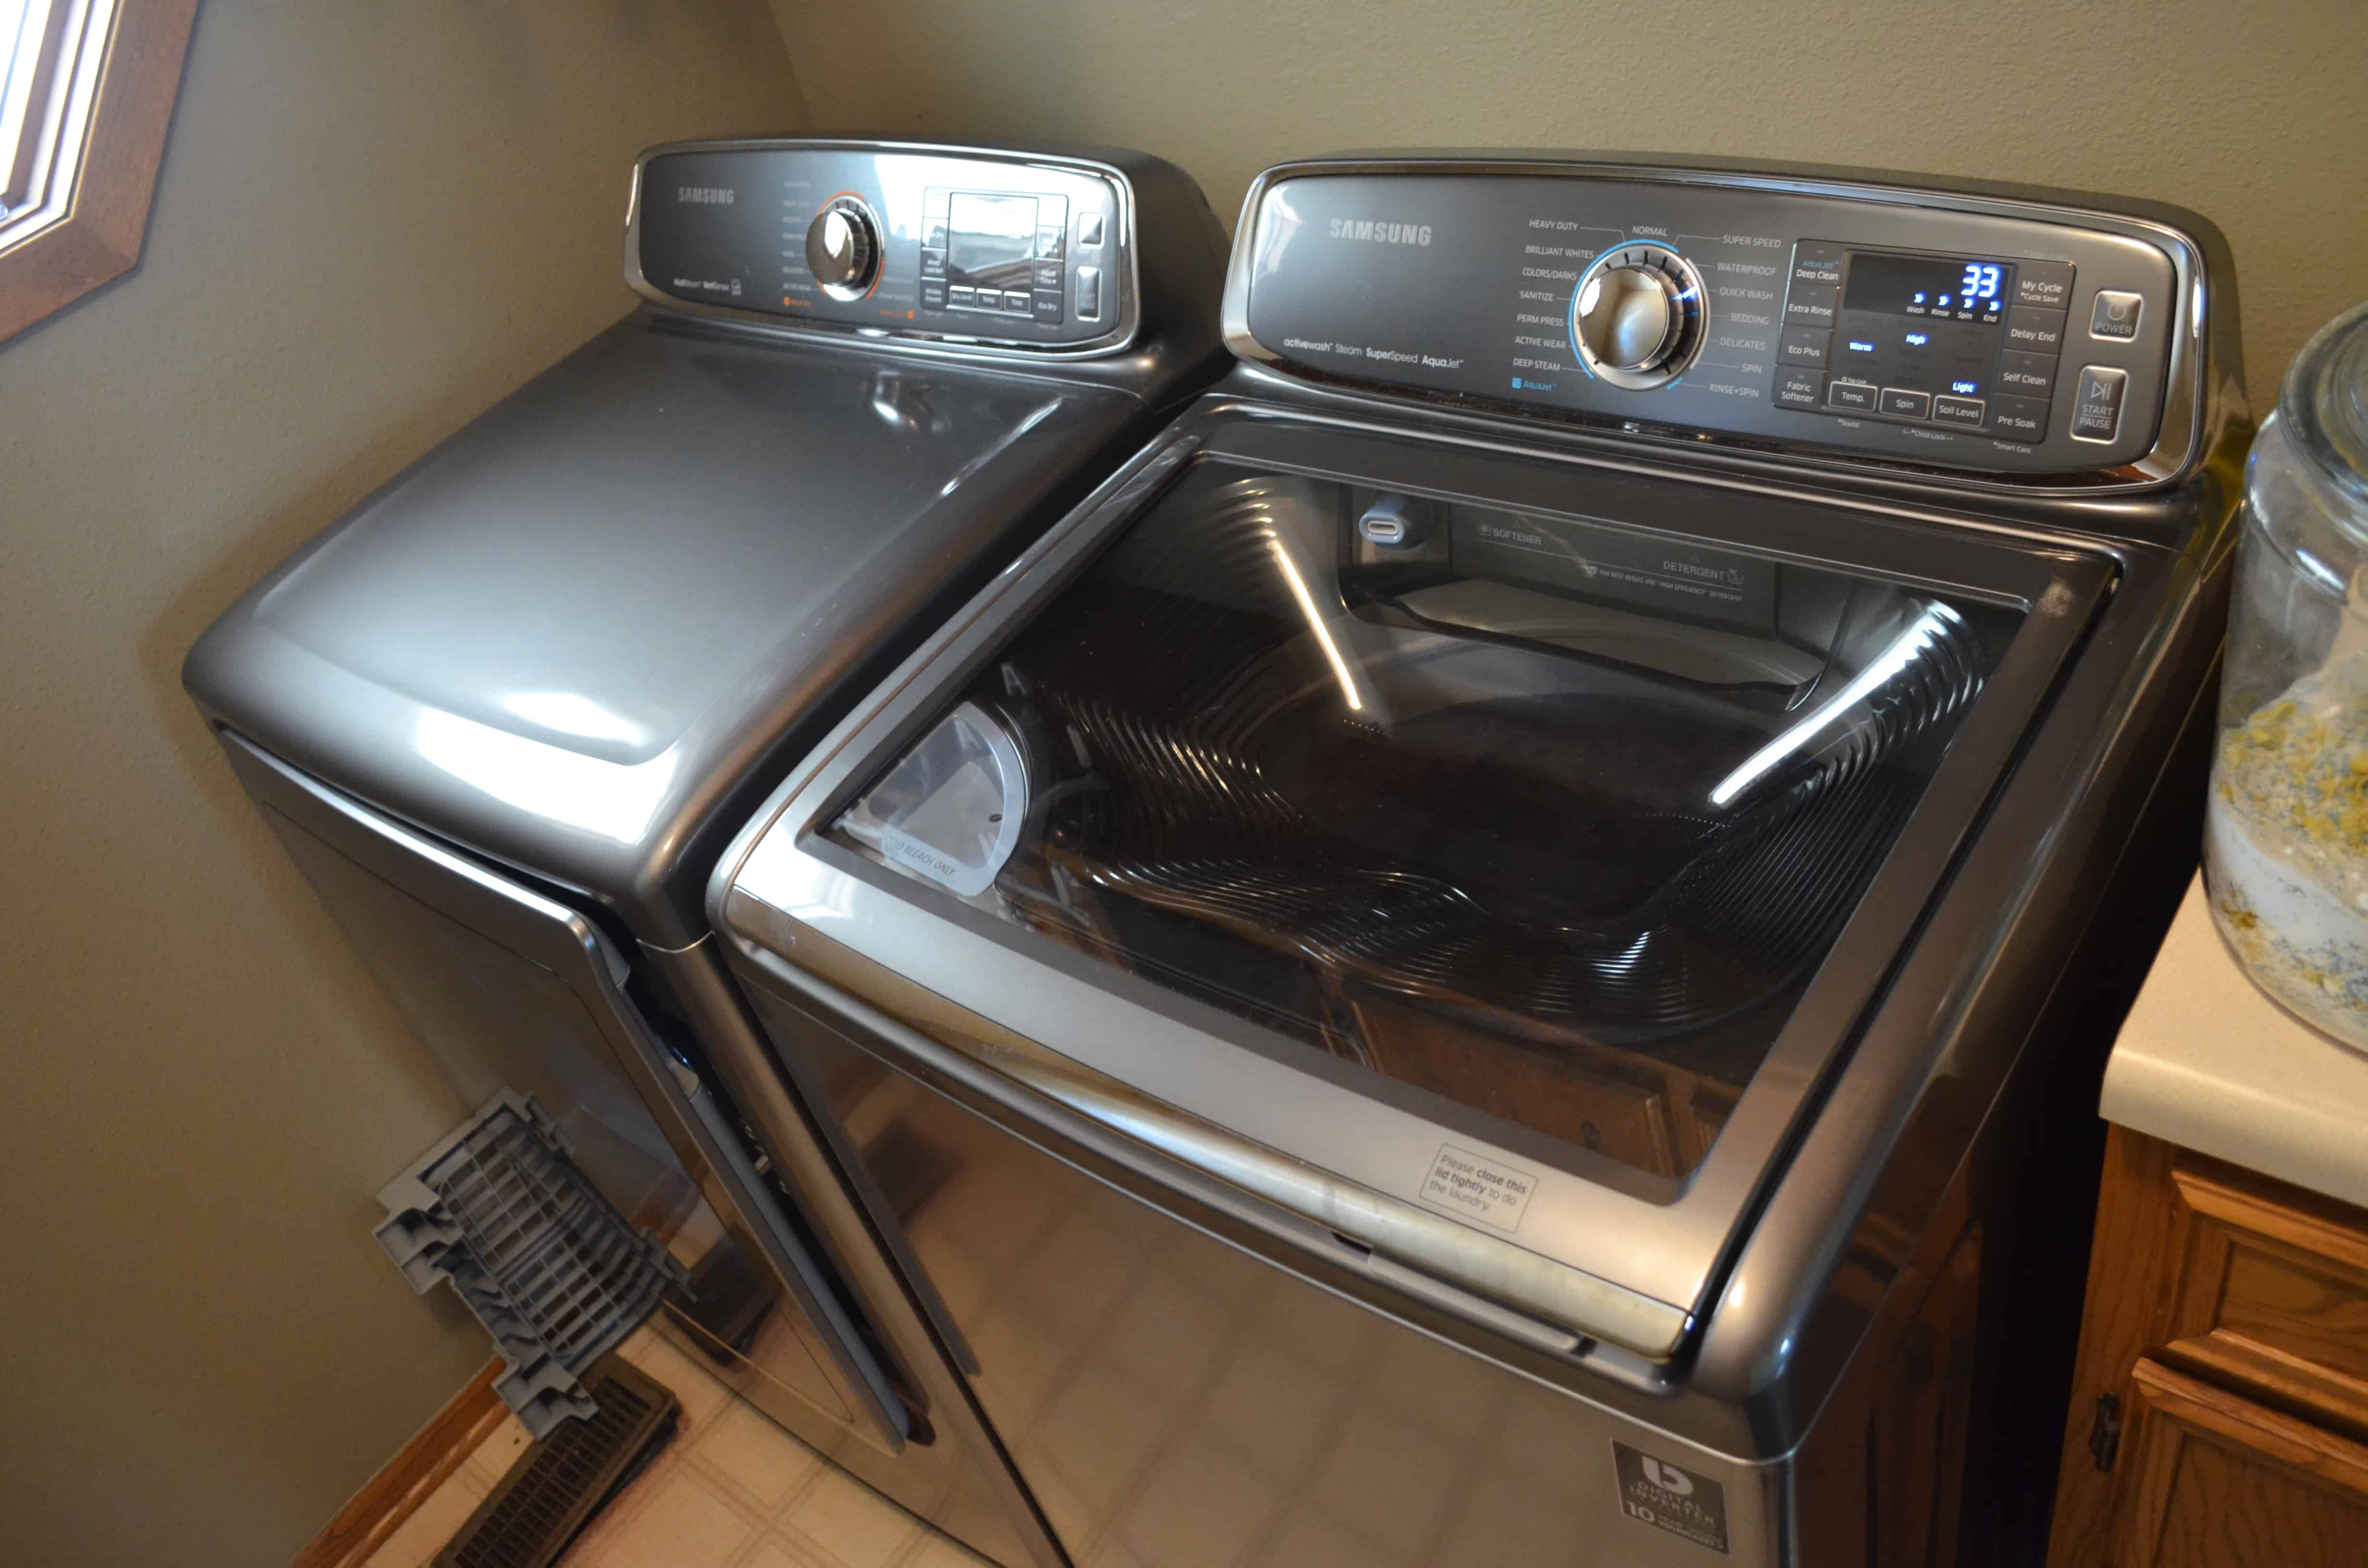 Samsung Active Wash Washer Dryer Review At Best Buy